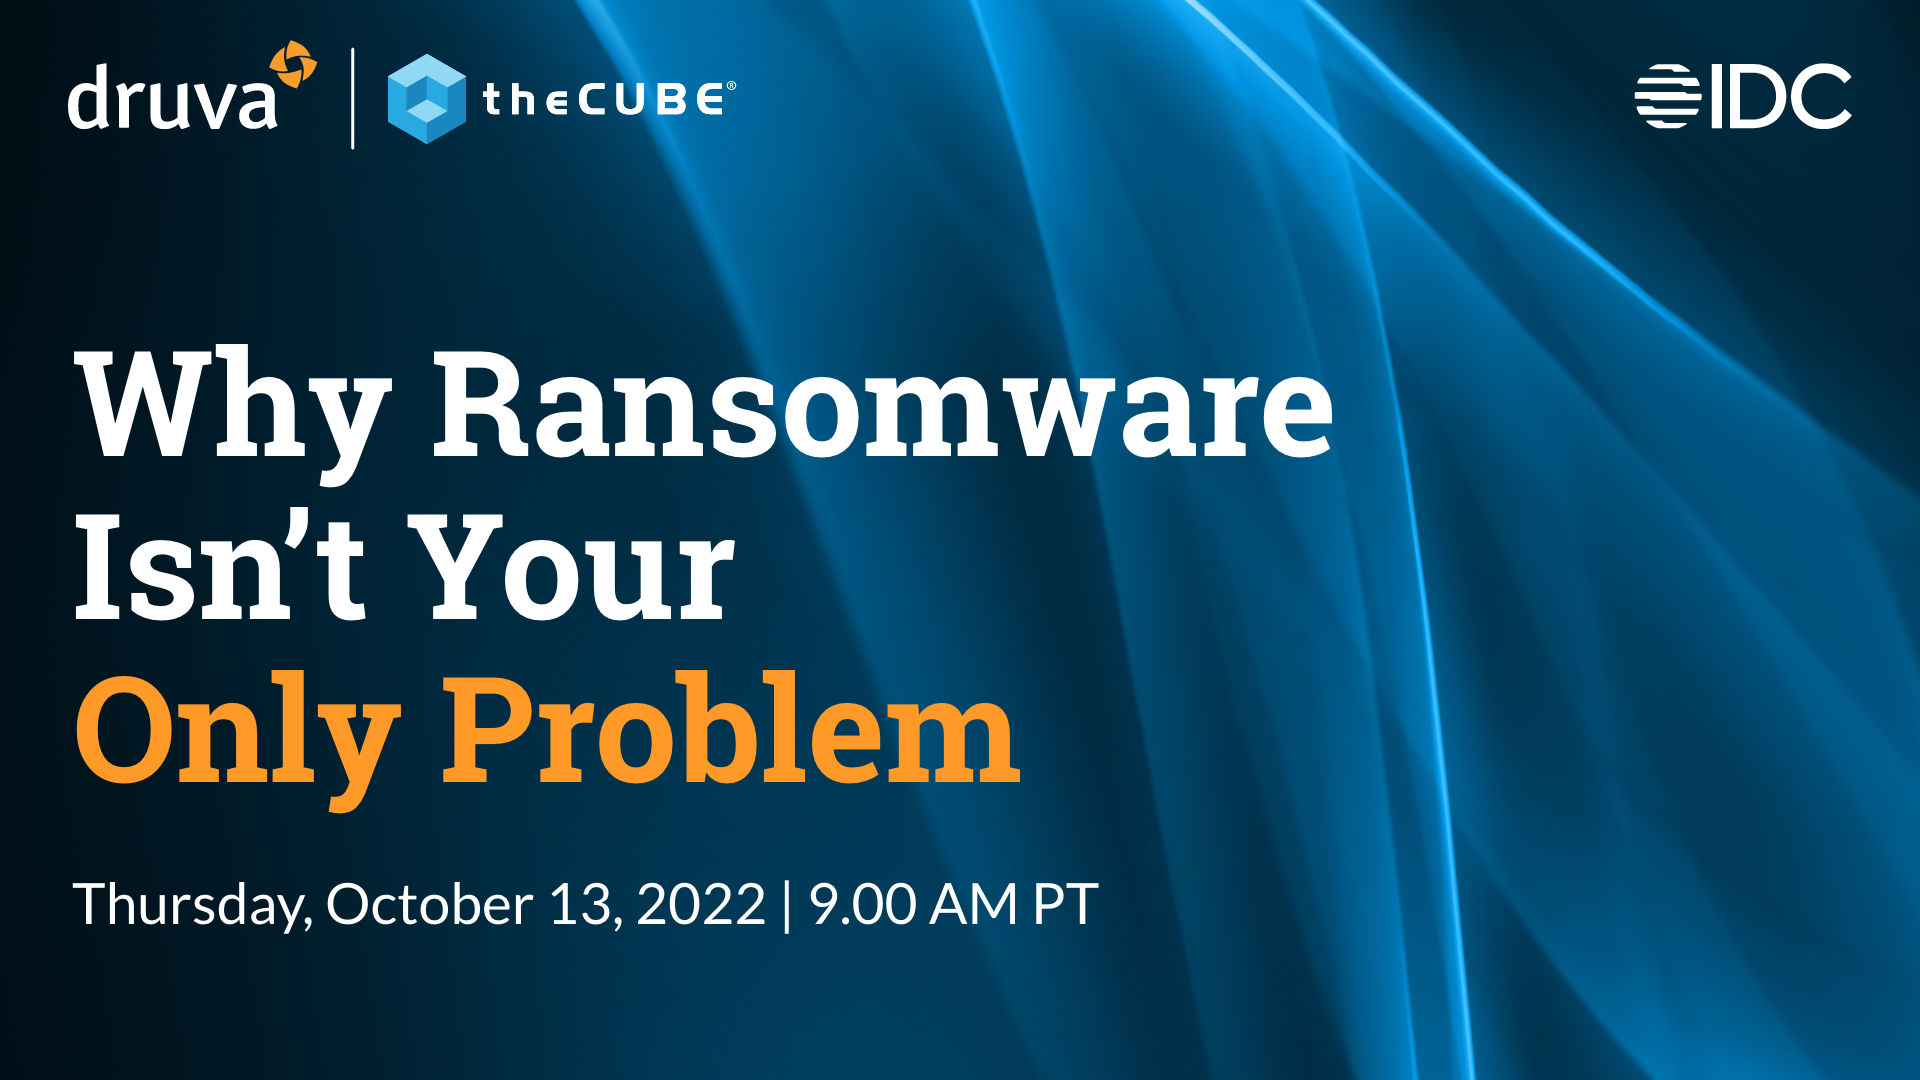 What to expect at 'Why Ransomware Isn't Your Only Problem': Join theCUBE Oct. 13